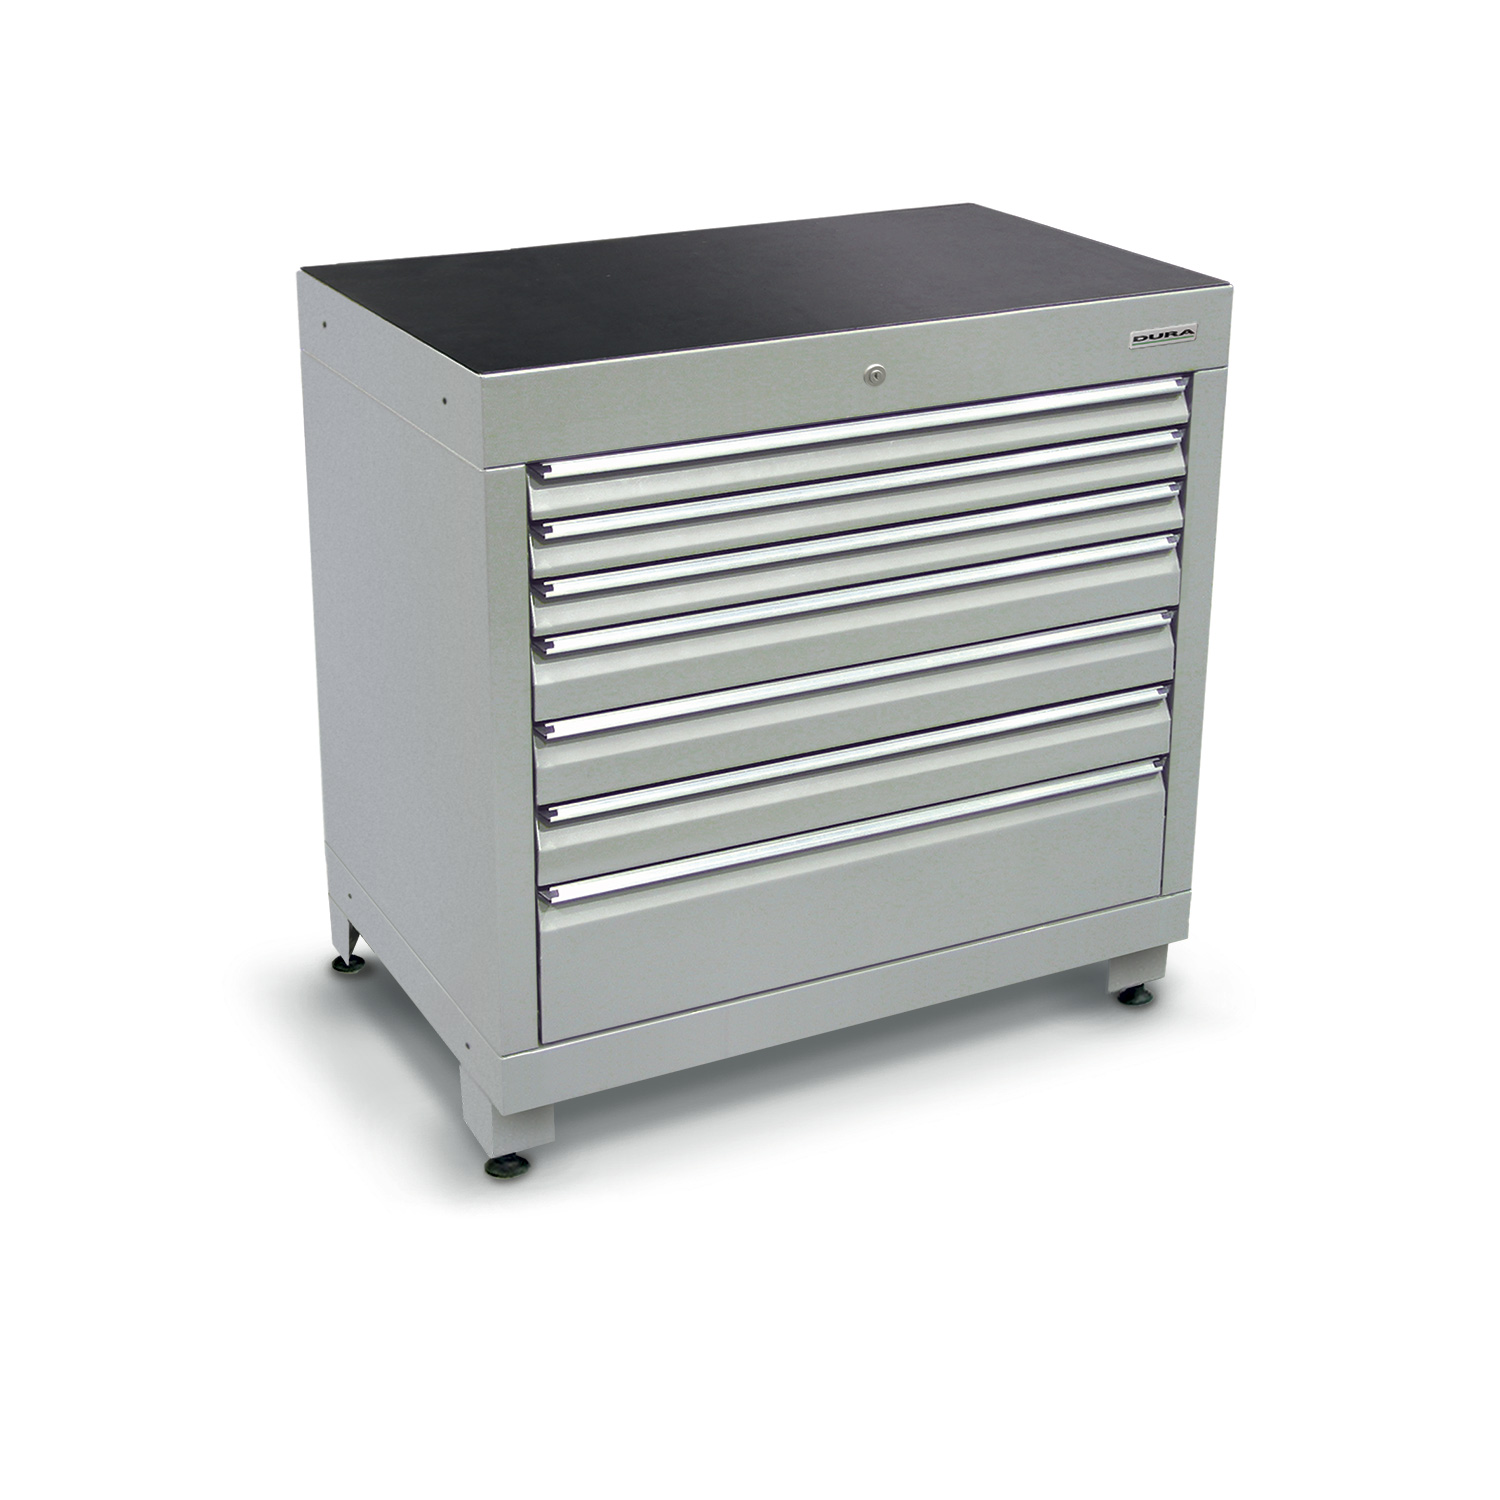 900 series cabinet with 7 drawers (3 slim, 3 medium, 1 large) and feet